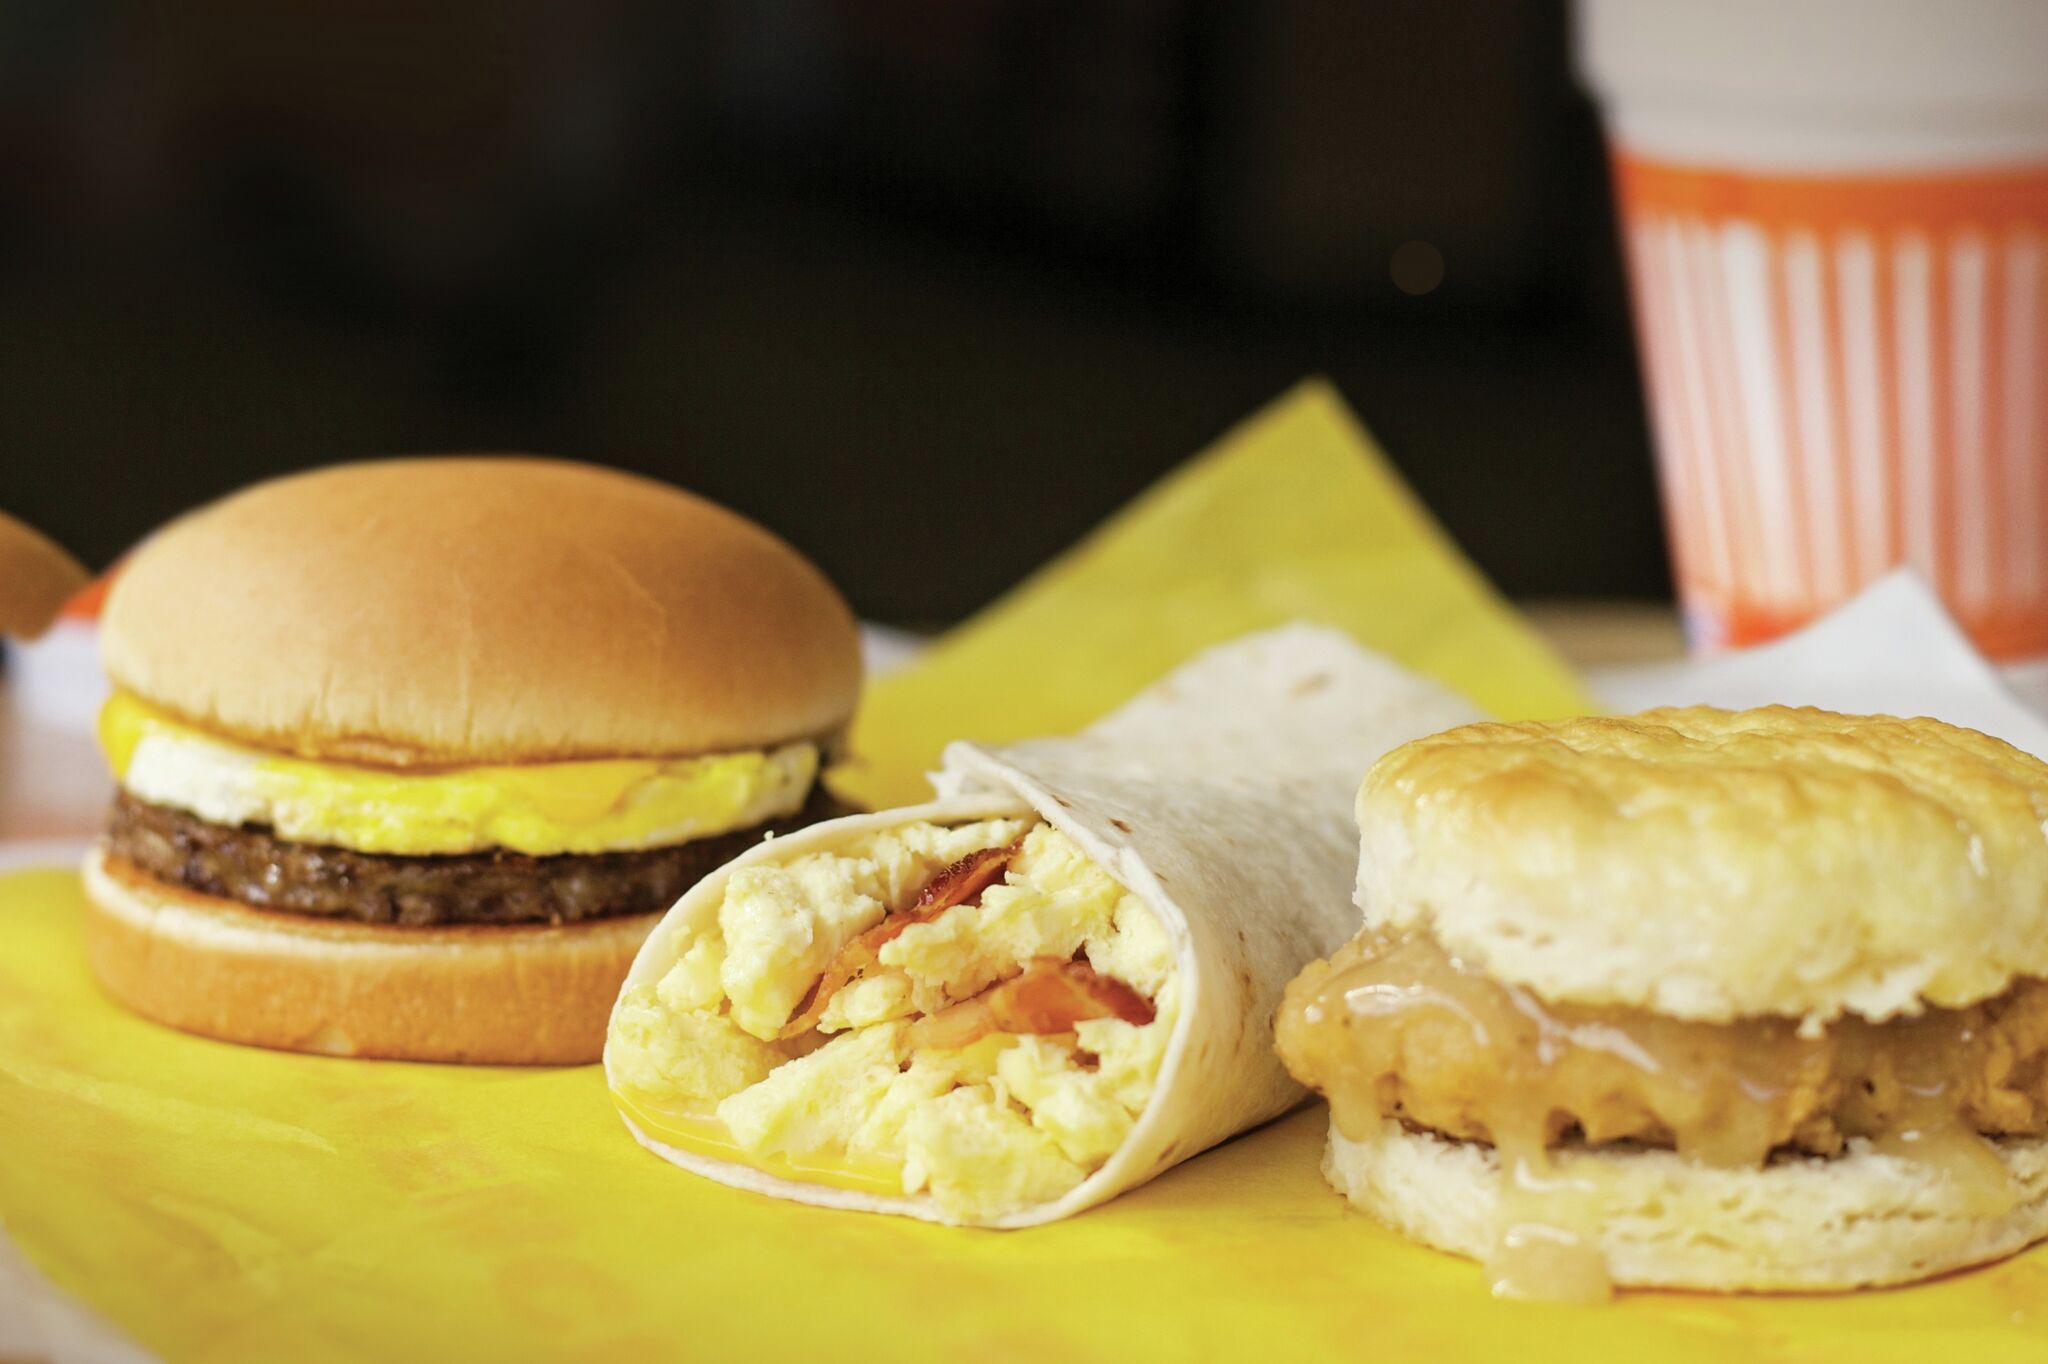 Whataburger is giving away free breakfast during Teacher Appreciation